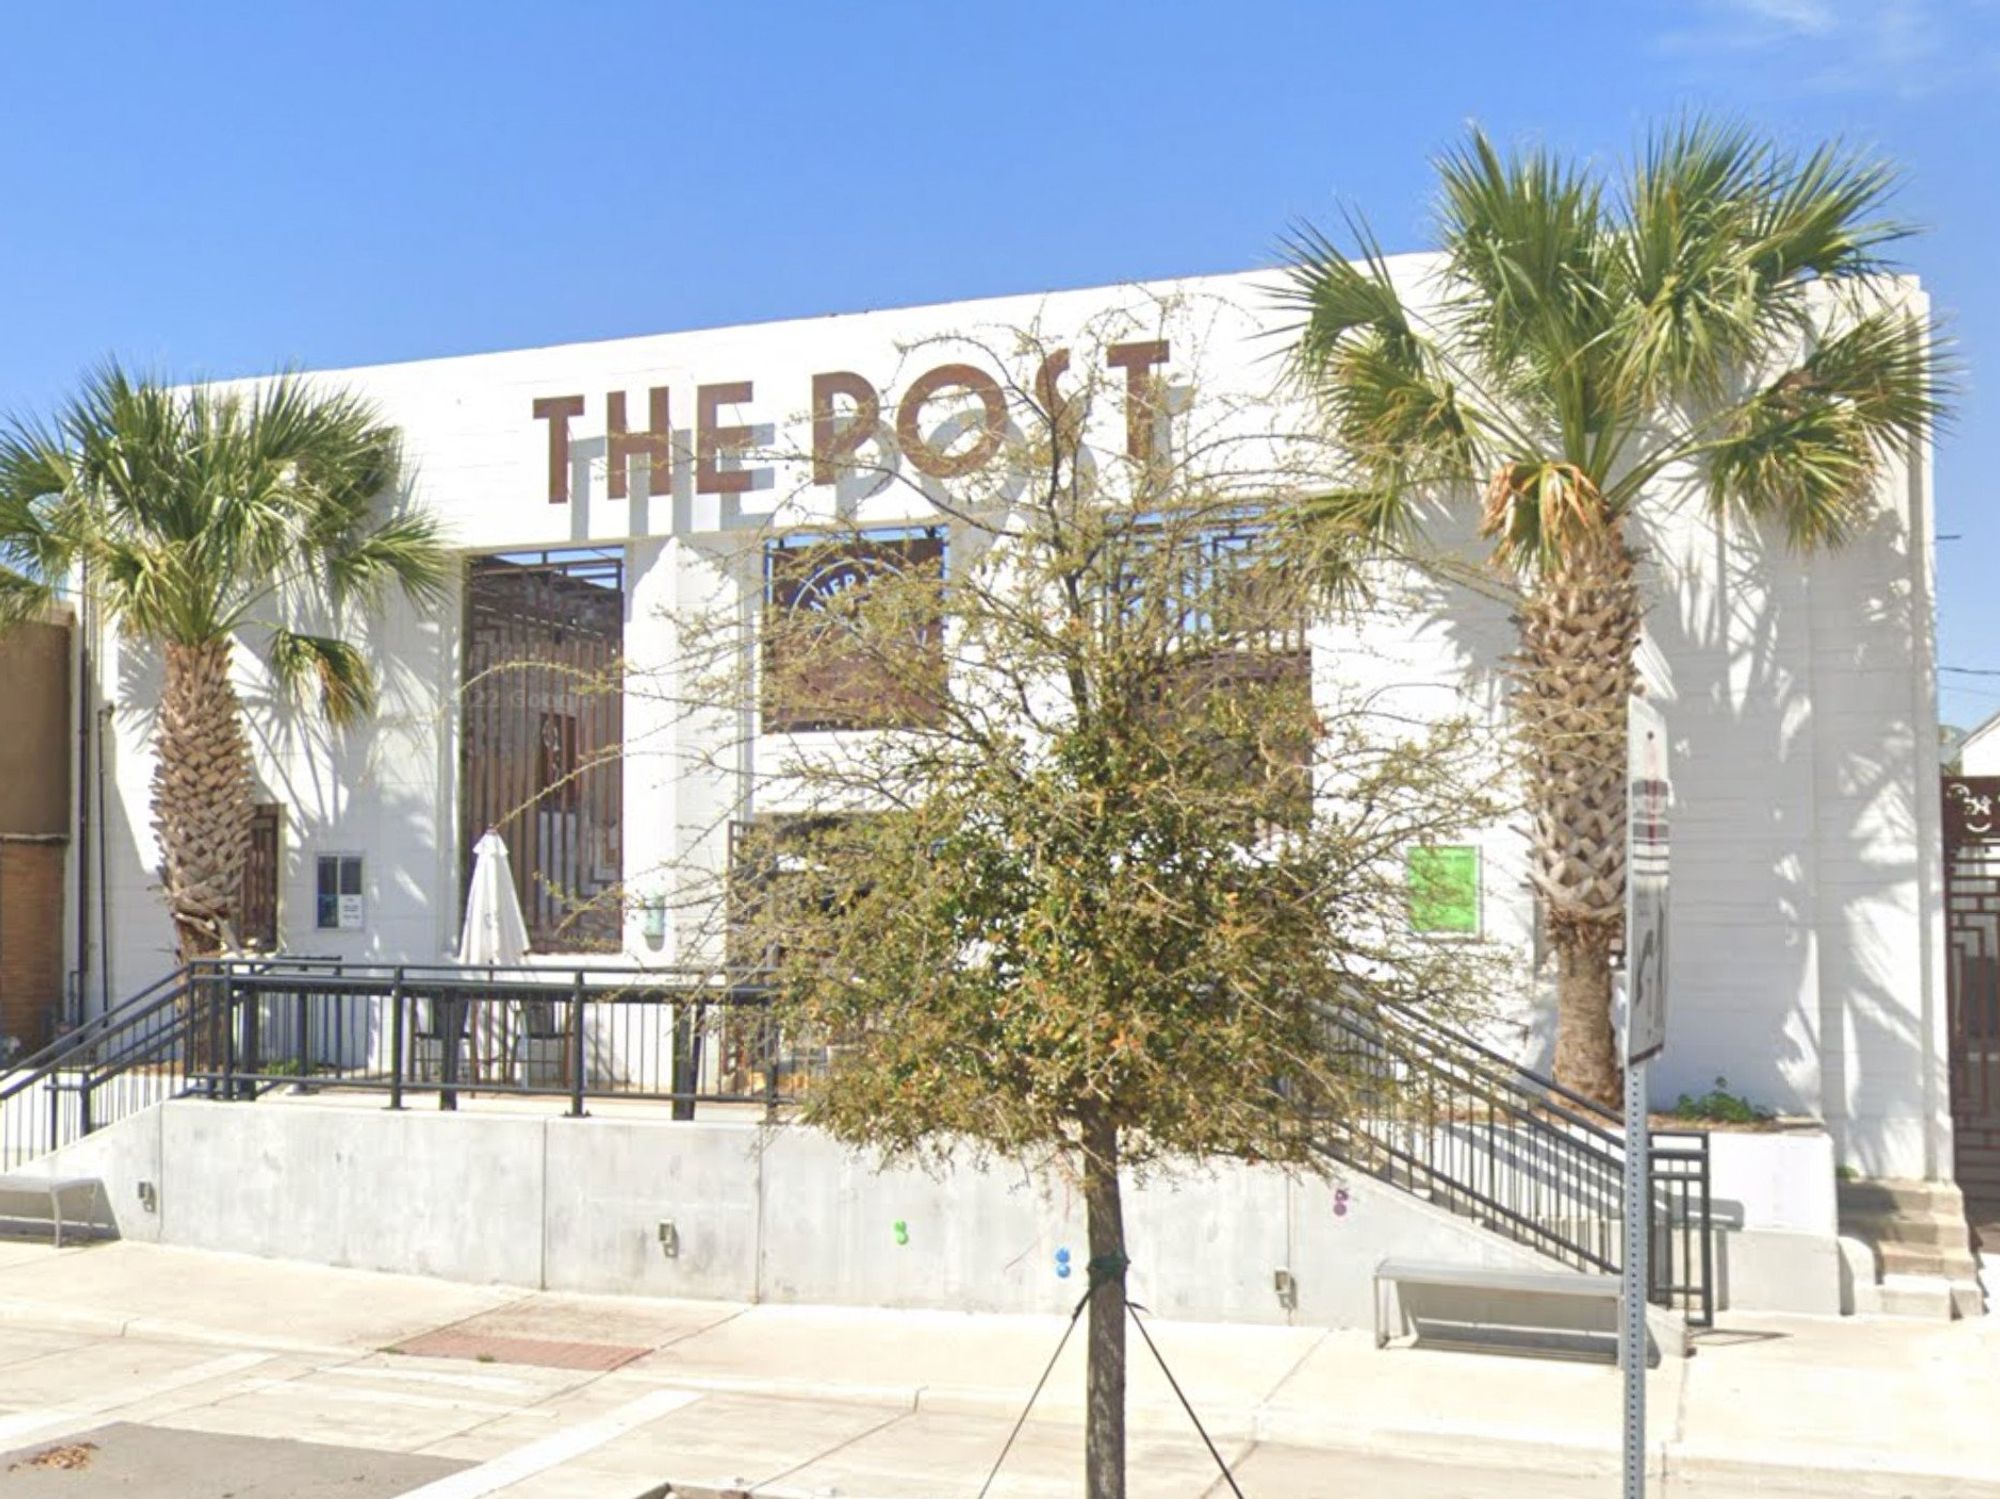 The Post at River East